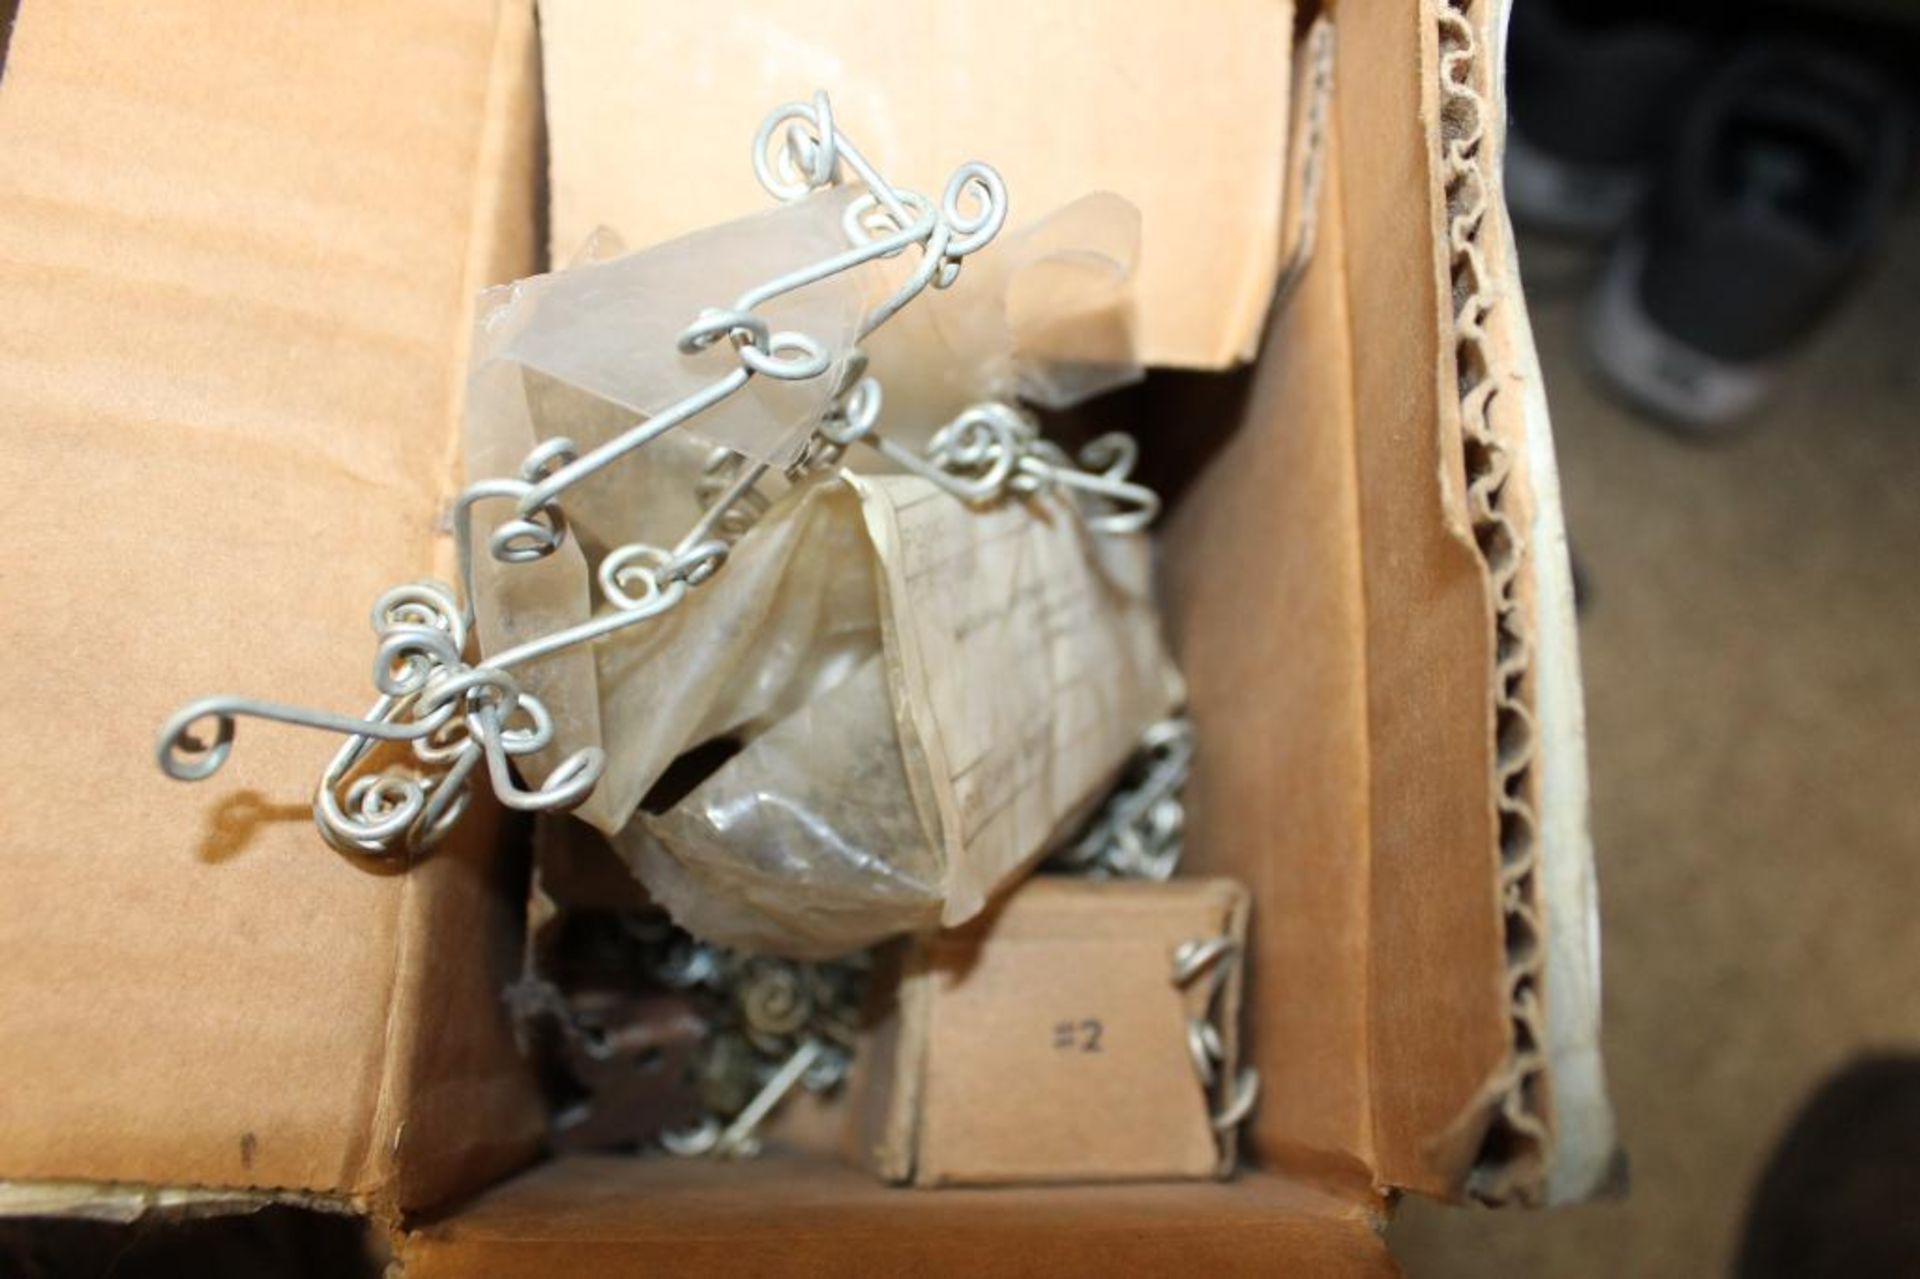 Lot of (9) Boxes and (1) Blue Bin of Assorted Pins, Bolts, Washers and Nuts - Image 10 of 13